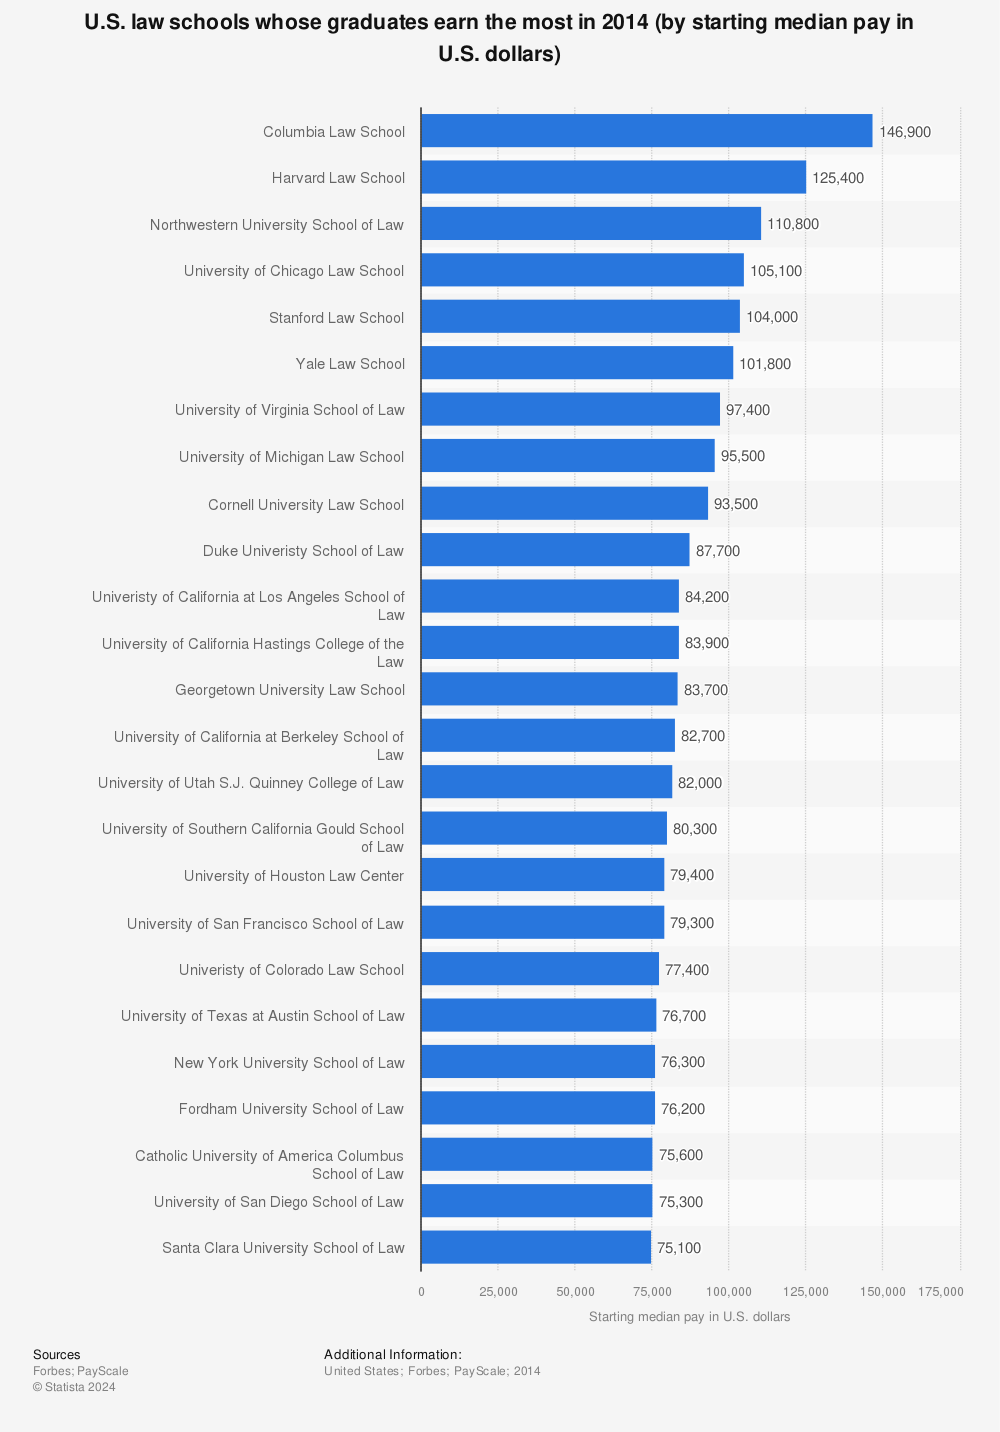 Statistic: U.S. law schools whose graduates earn the most in 2014 (by starting median pay in U.S. dollars) | Statista